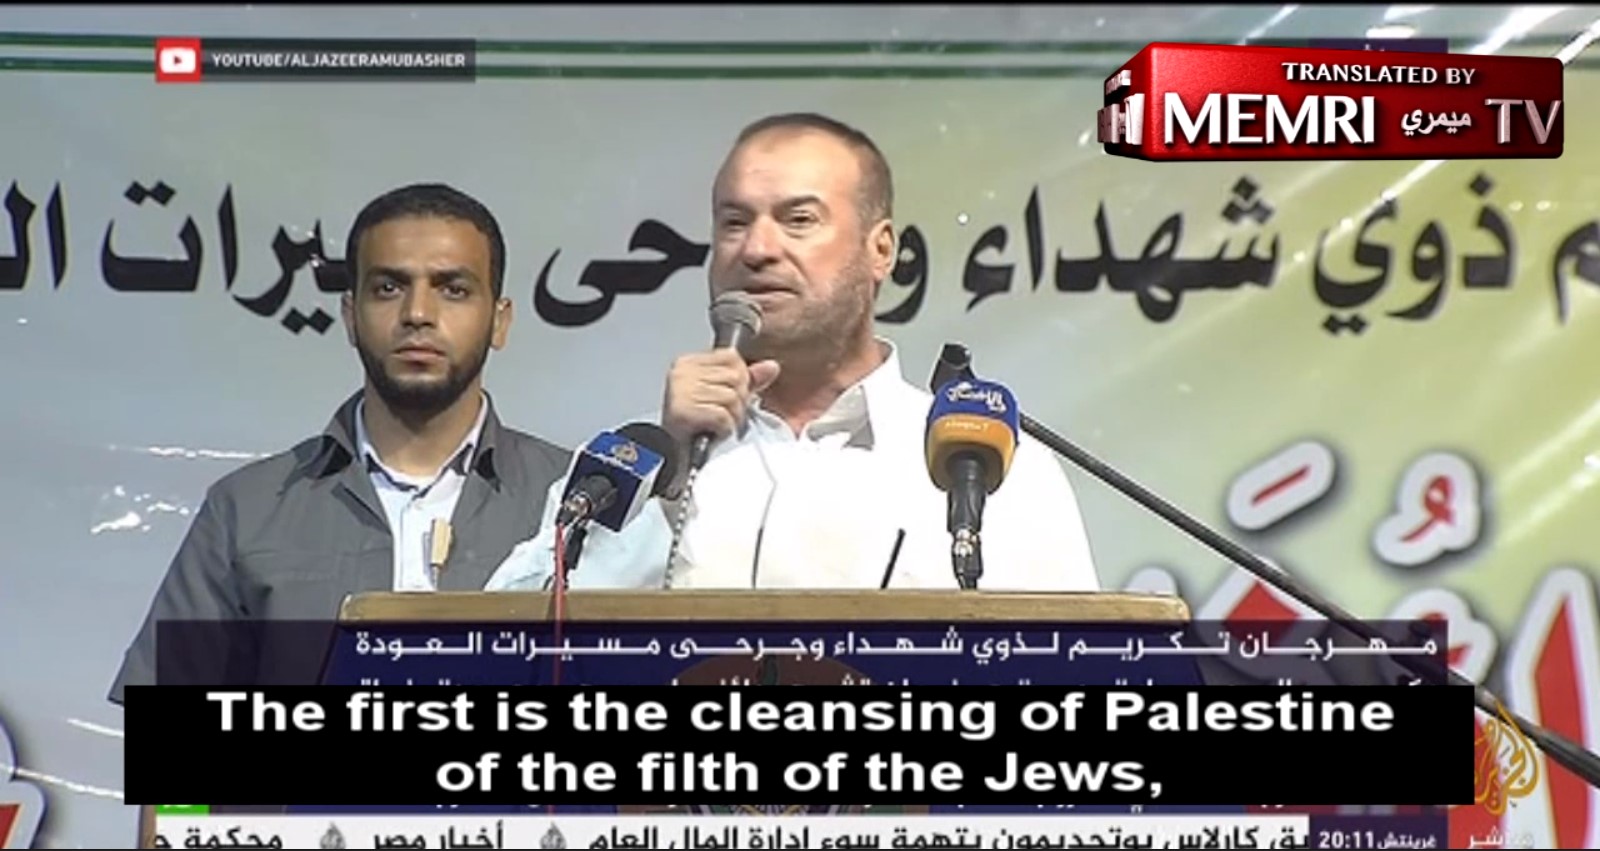 Senior Hamas member calls for ridding 'Palestine of filth of the Jews' |  The Times of Israel